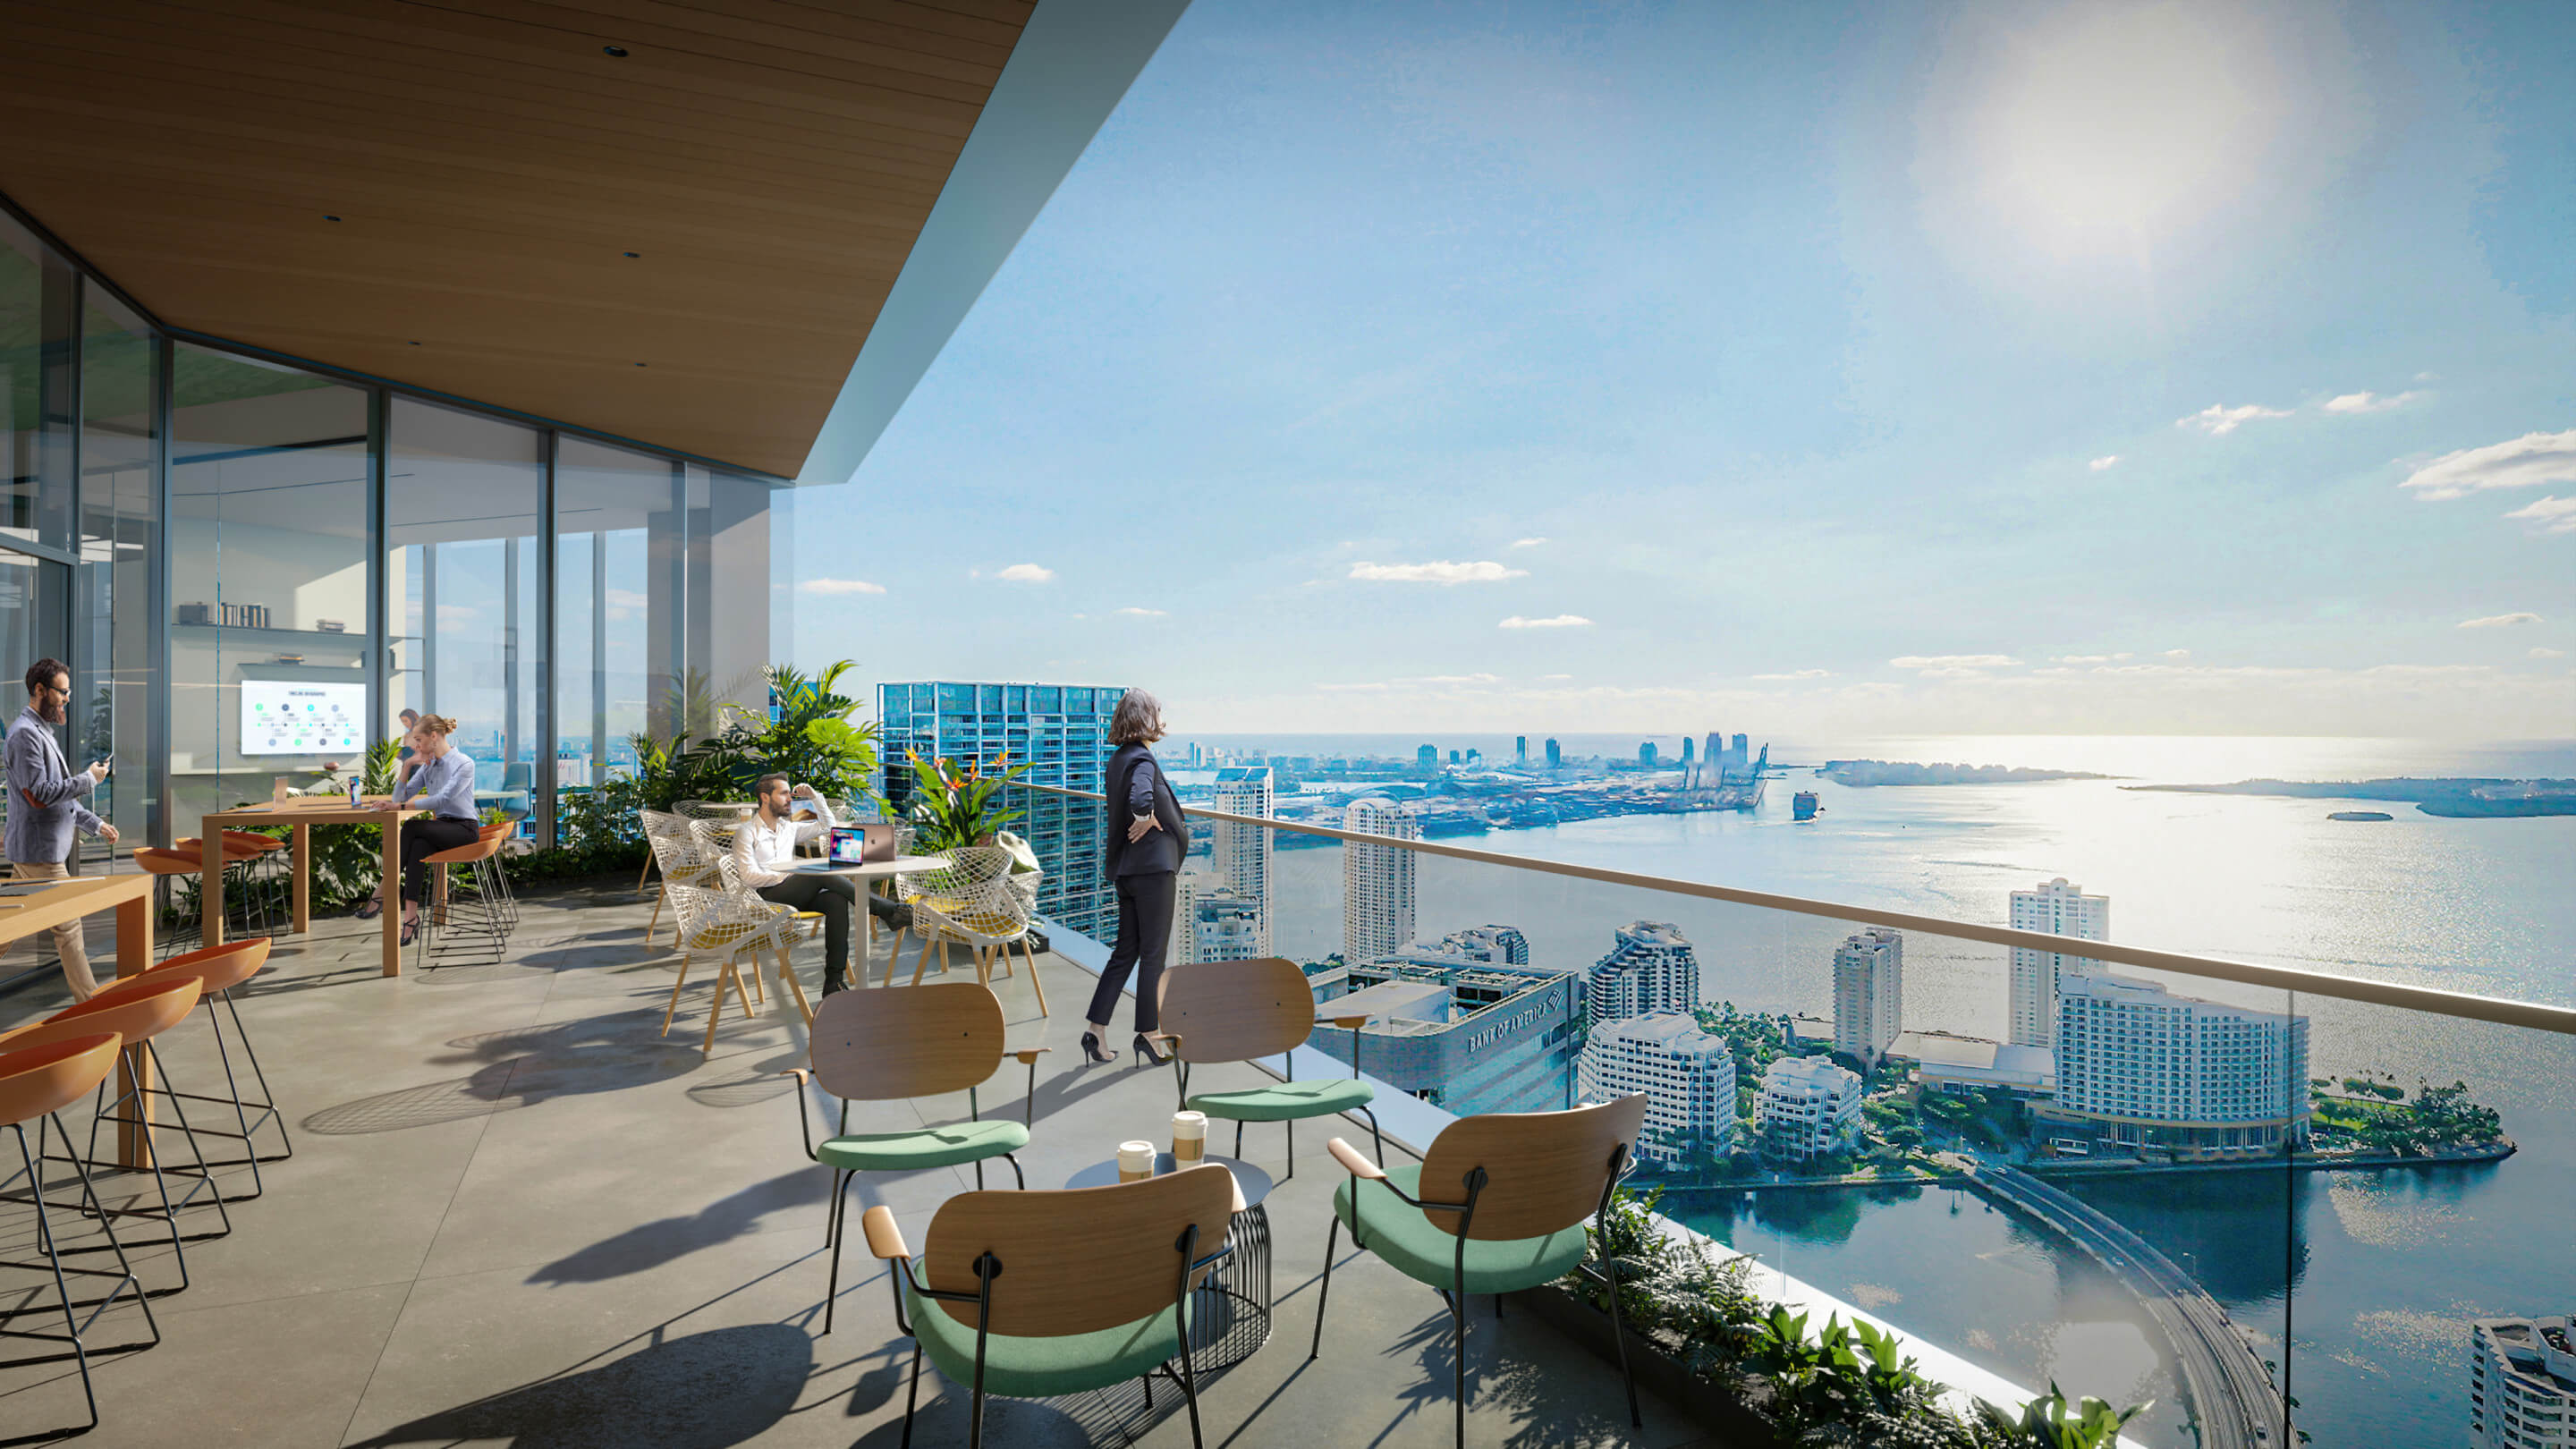 rendering of an outdoor terrace at a miami skyscraper